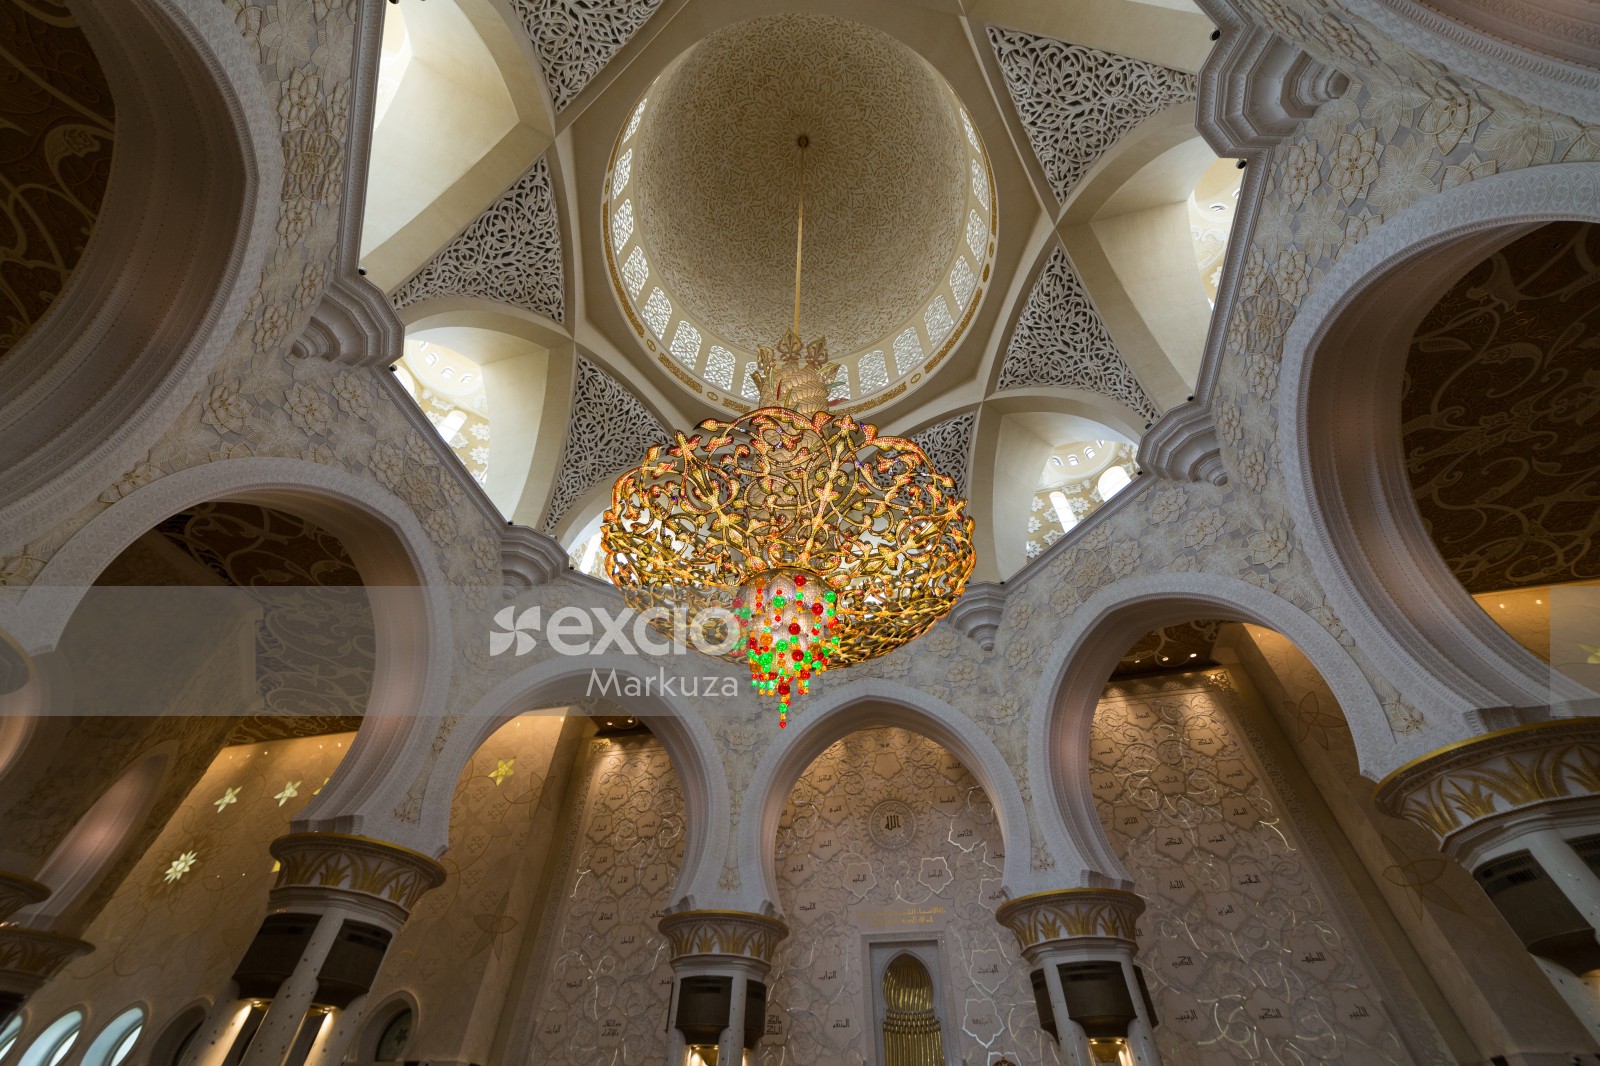 Under the Mosque's dome